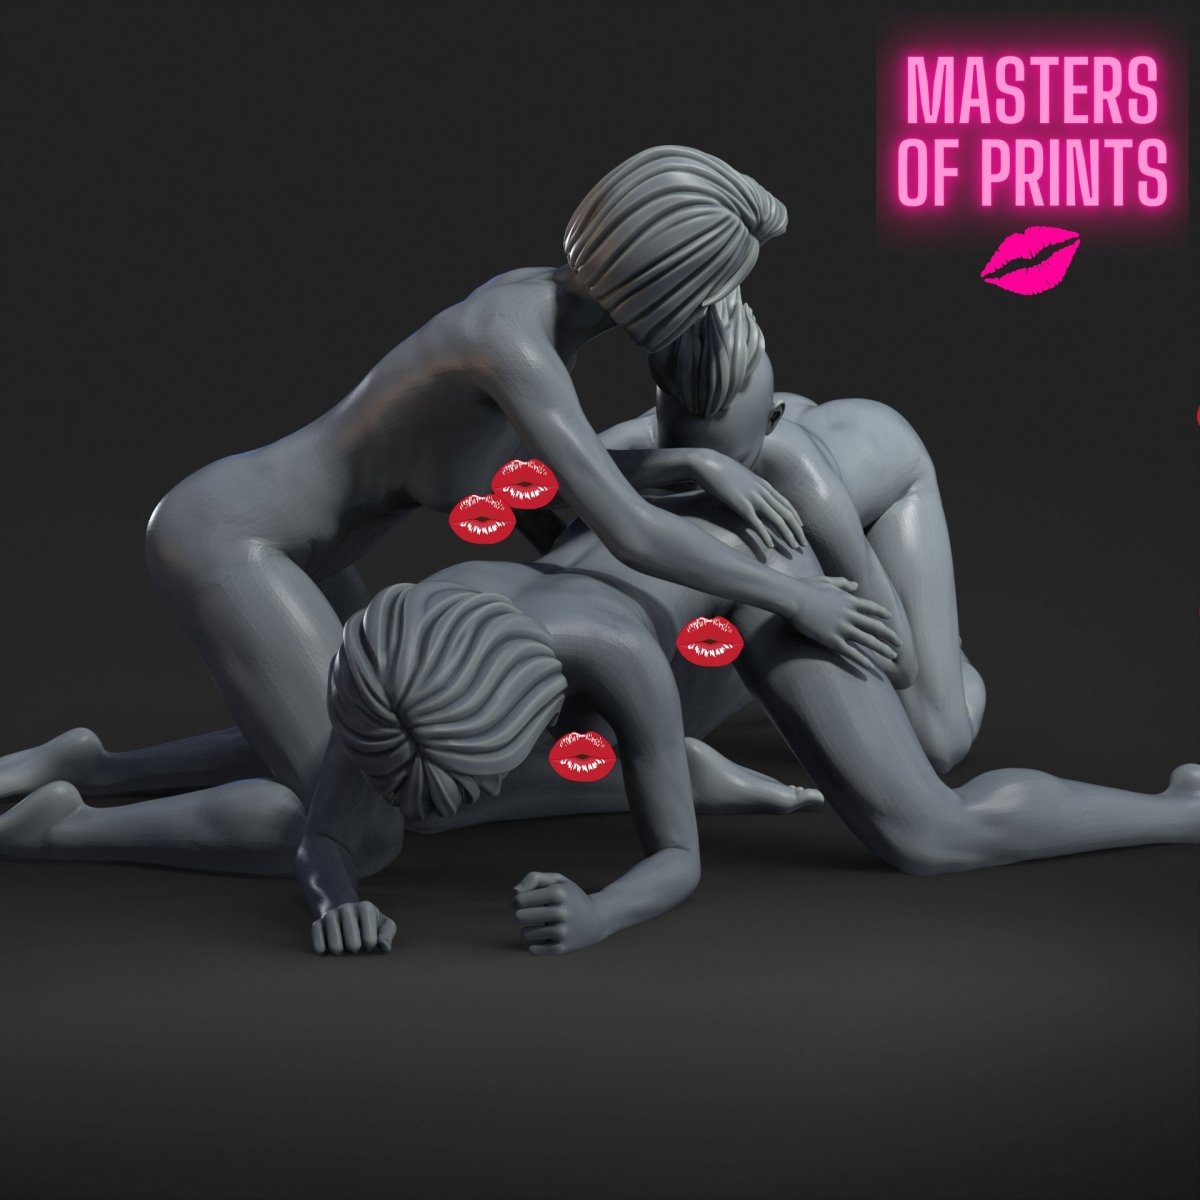 3some 537 Mature 3d Printed miniature FanArt by Masters Of Prints Collectables Statues & Figurines